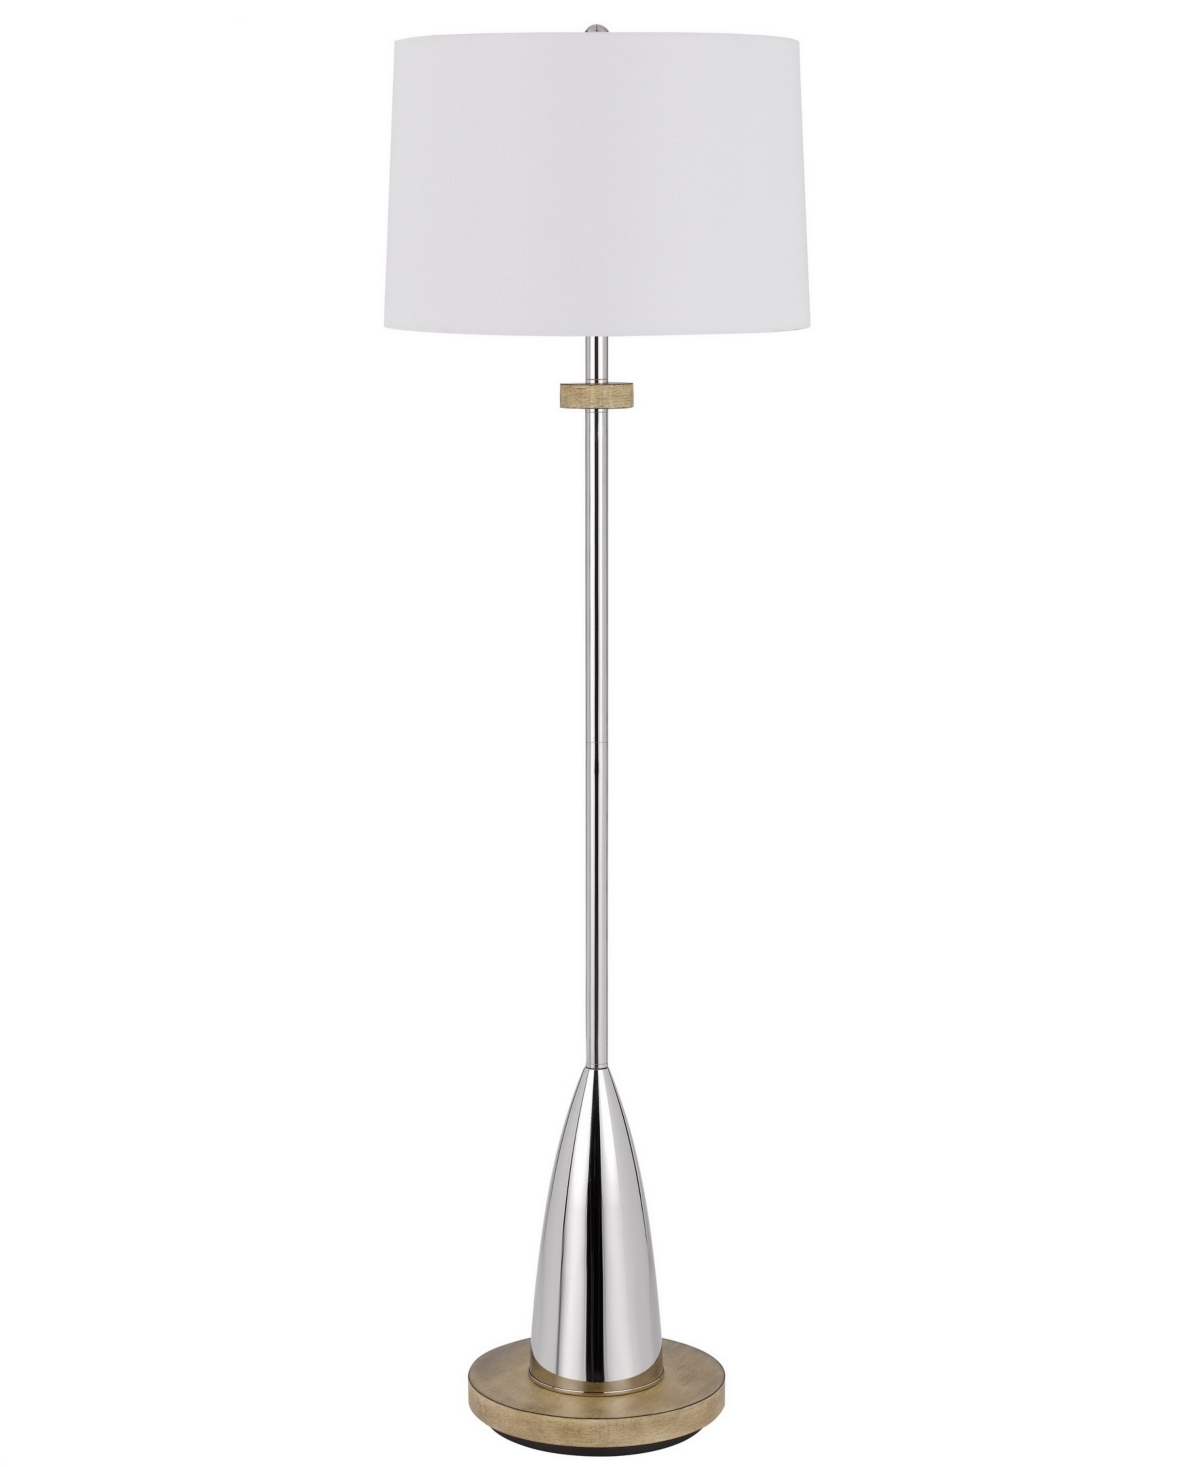 Cal Lighting 61" Height Metal Floor Lamp With Wood Accents In Chrome,wood